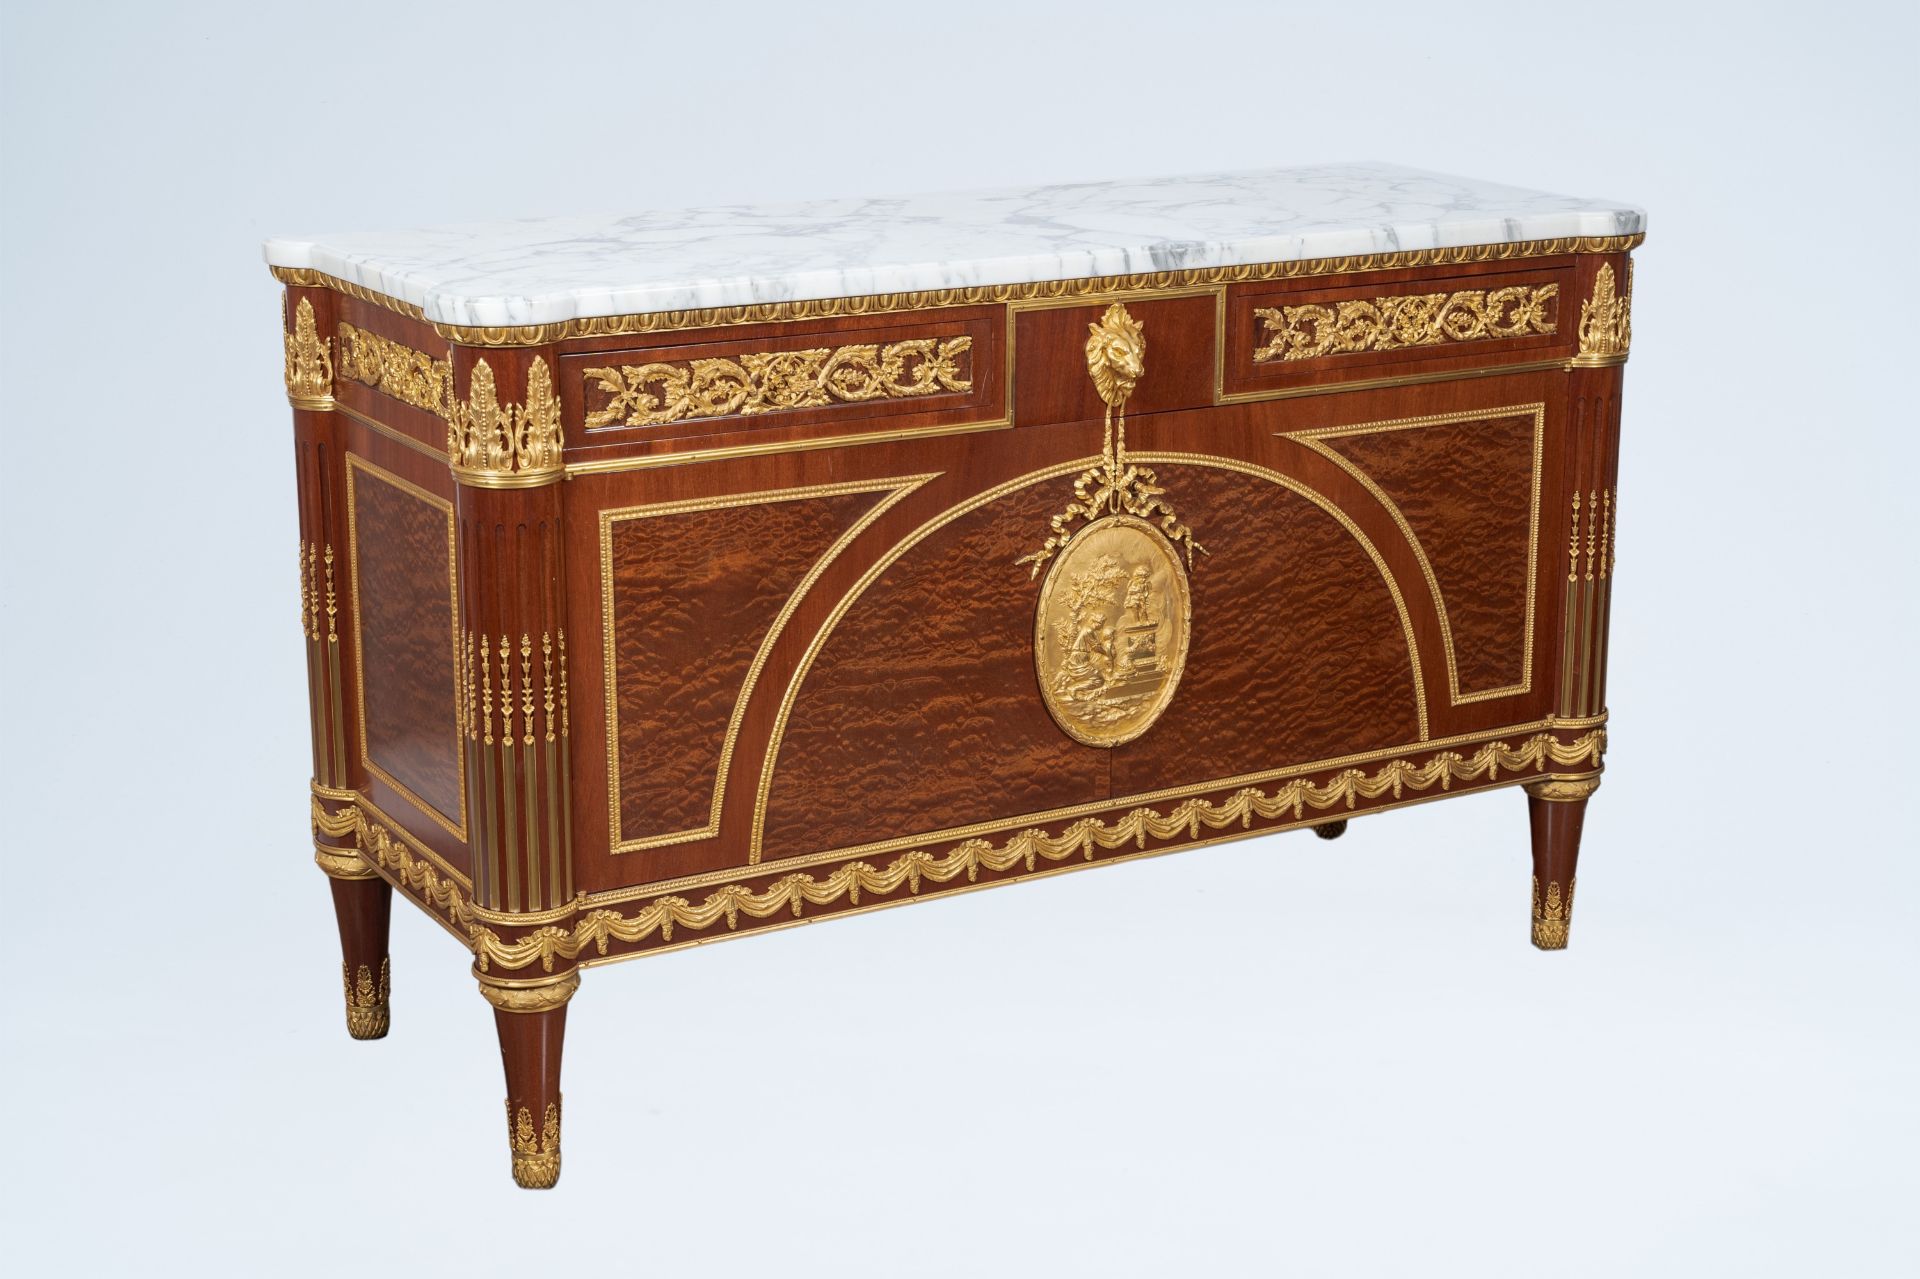 An impressive Neoclassical gilt bronze mounted wood chest of drawers with marble top, 20th C. - Image 2 of 10